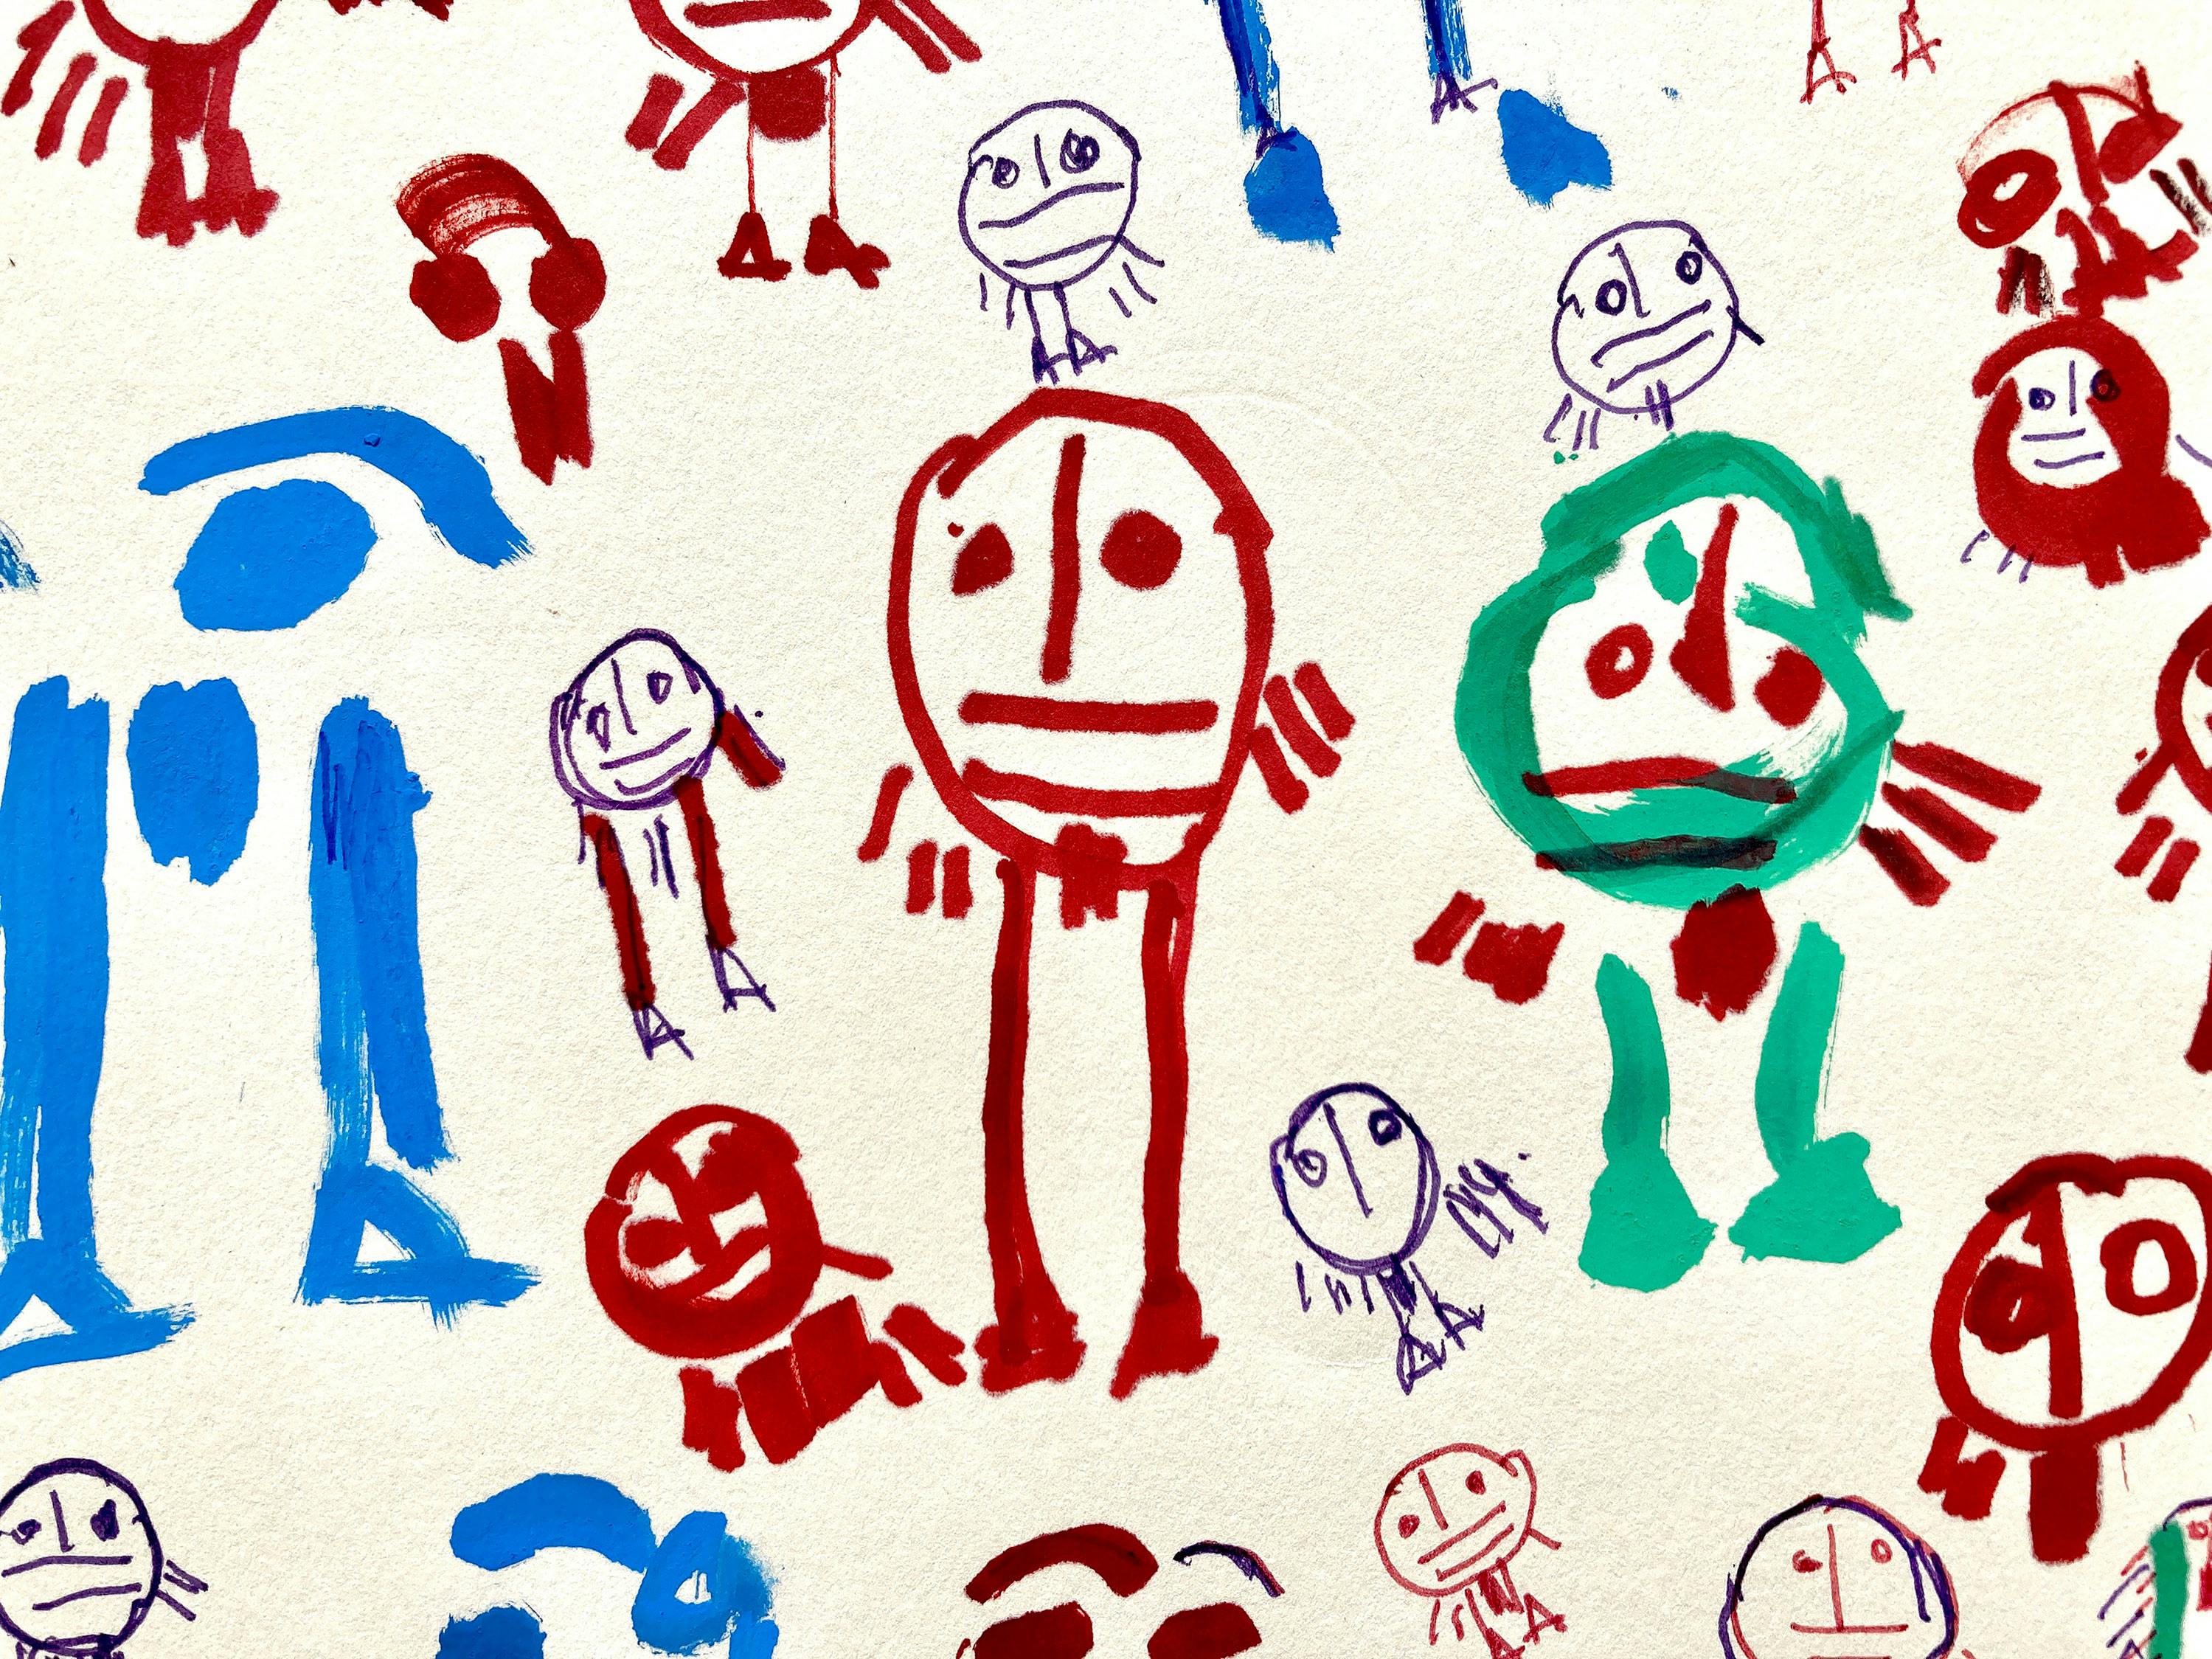 a felt-tip-pen drawing of various figures in blue, green and red ink